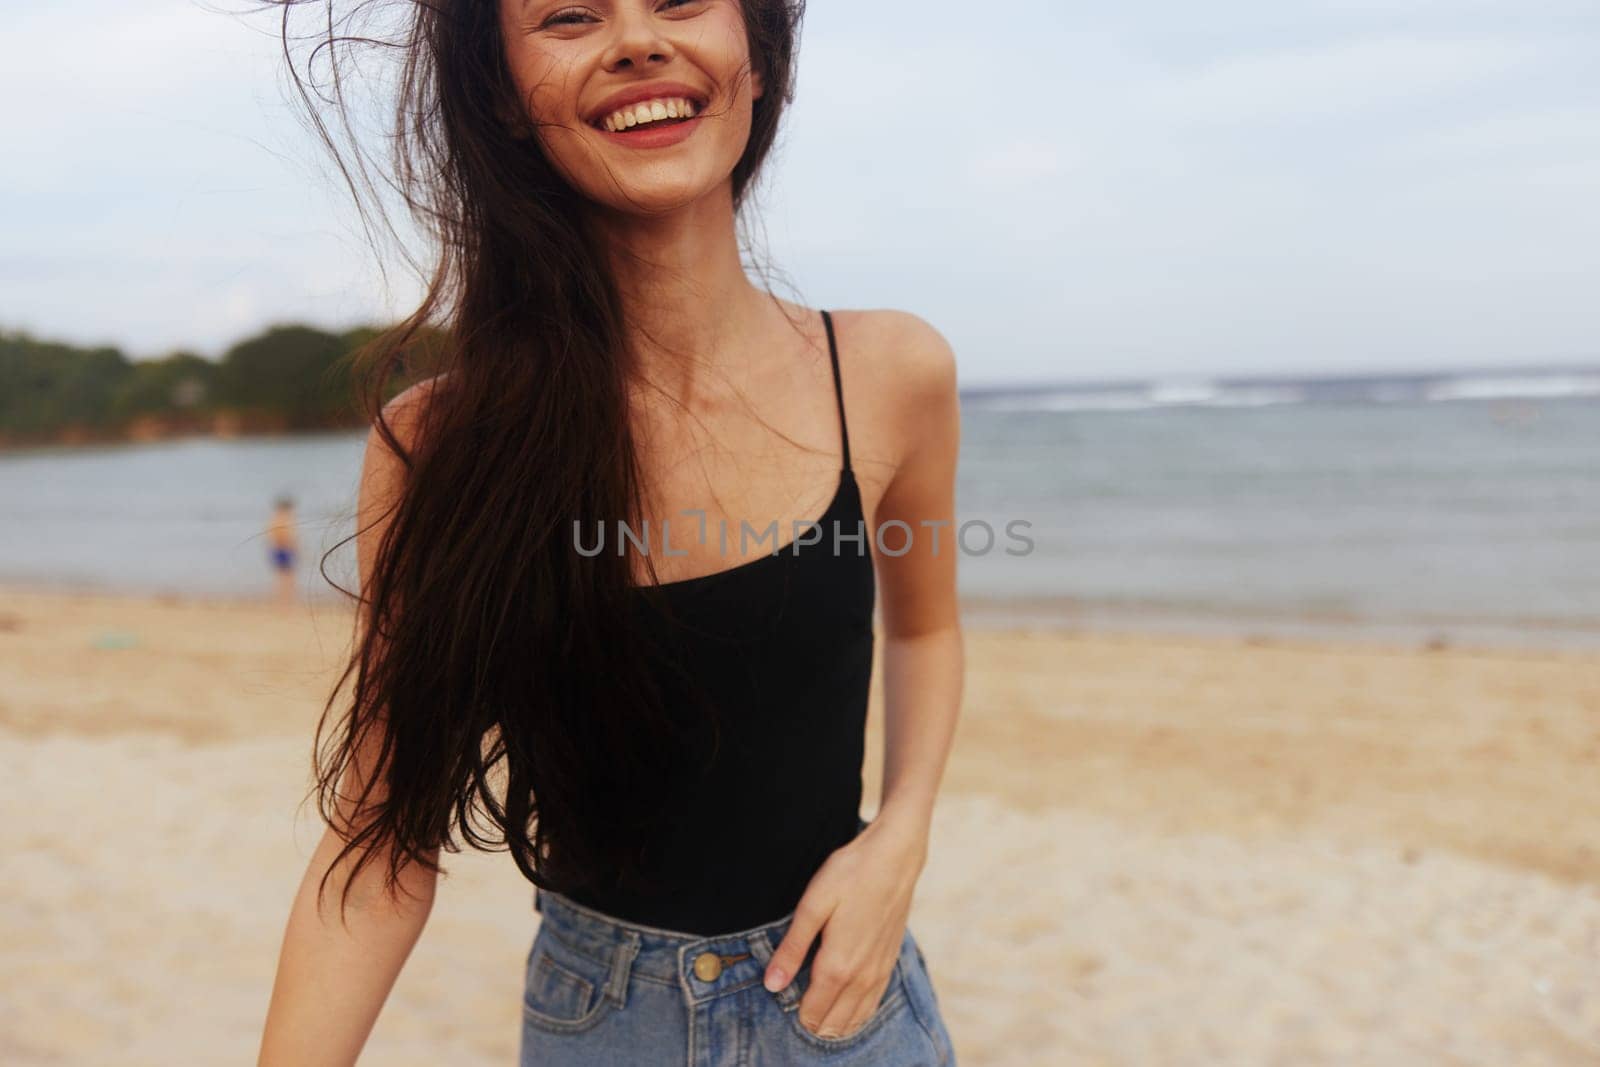 female woman shore sand vacation beautiful nature lifestyle running girl smile ocean sea hair beach coast smiling long sunset summer young travel